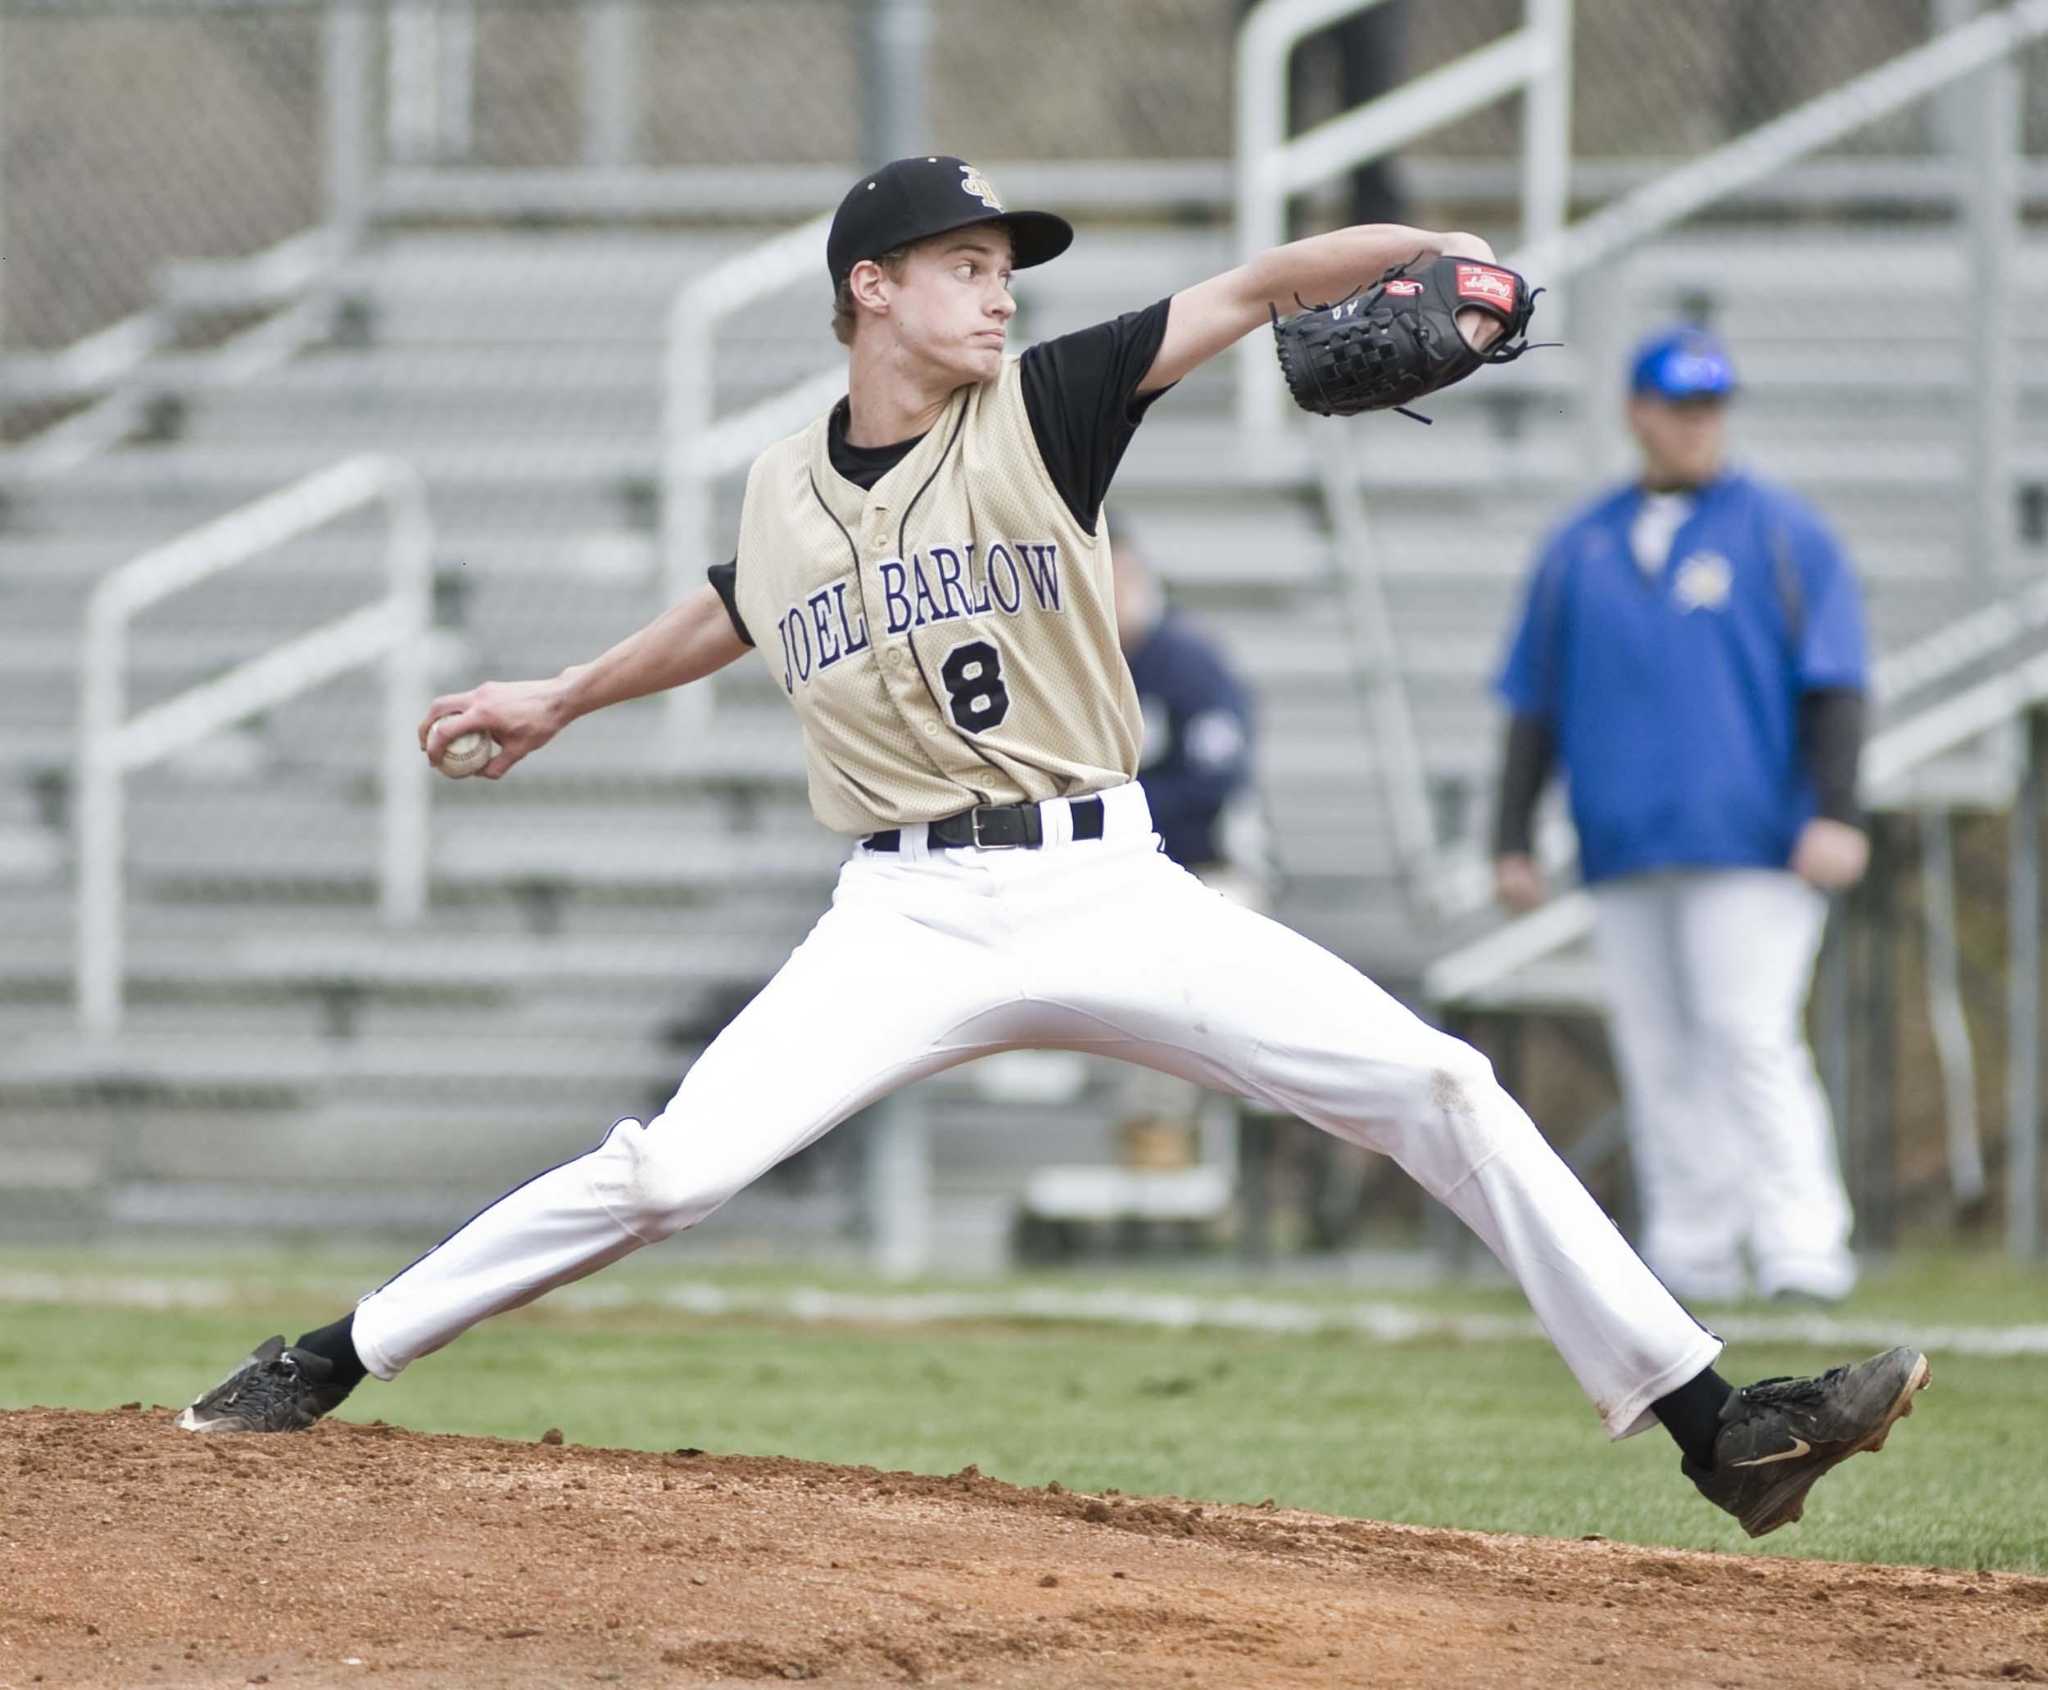 Senior-laden Barlow baseball team determined to rise to prominence